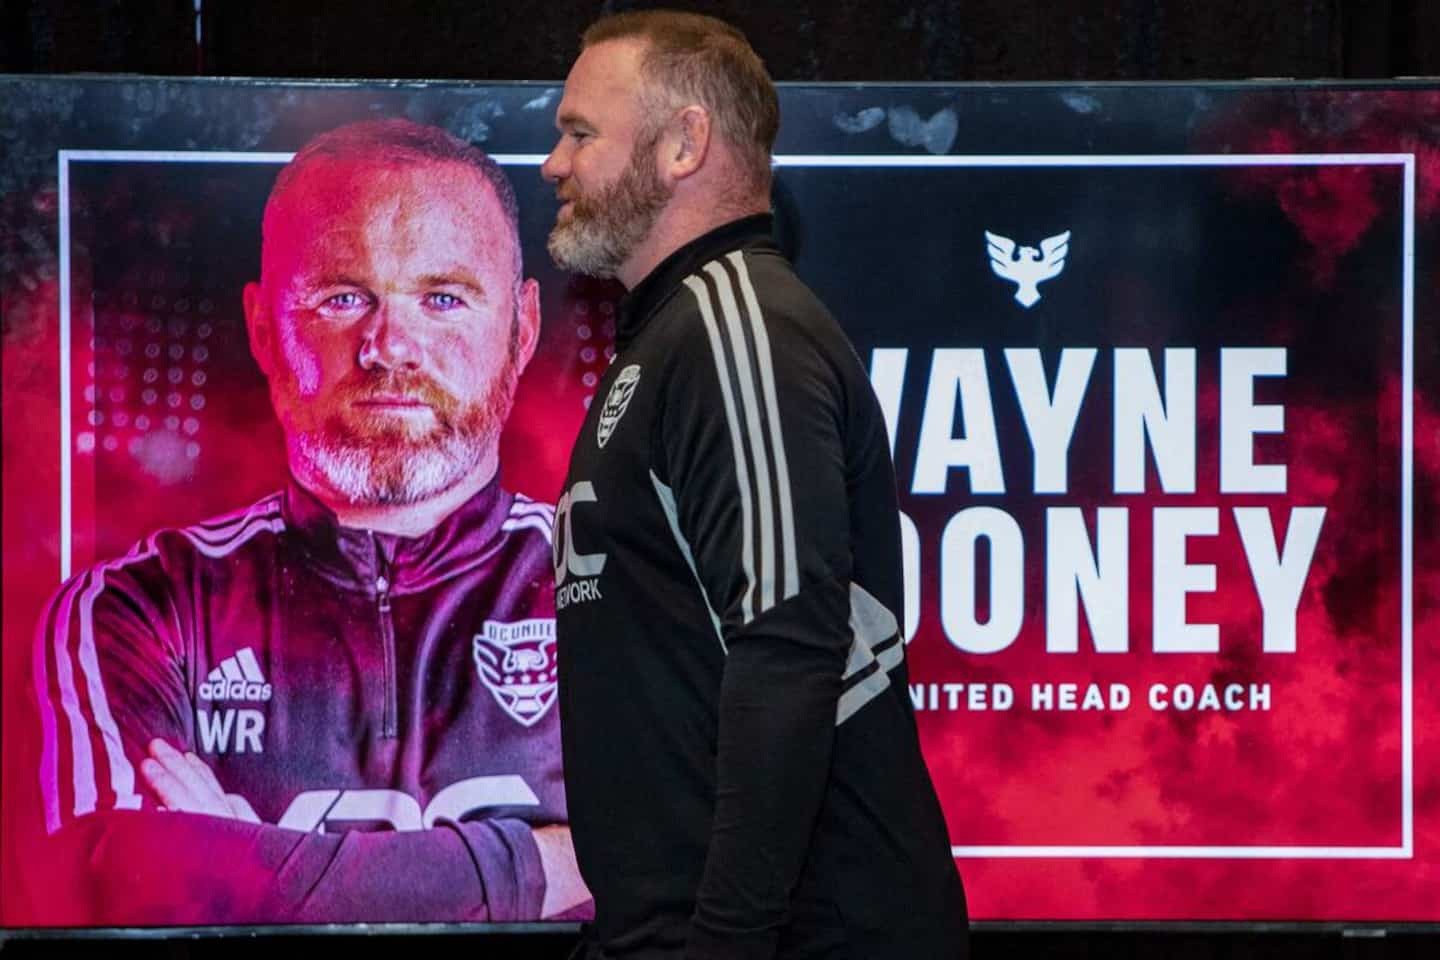 MLS: Wayne Rooney is back with D.C. United